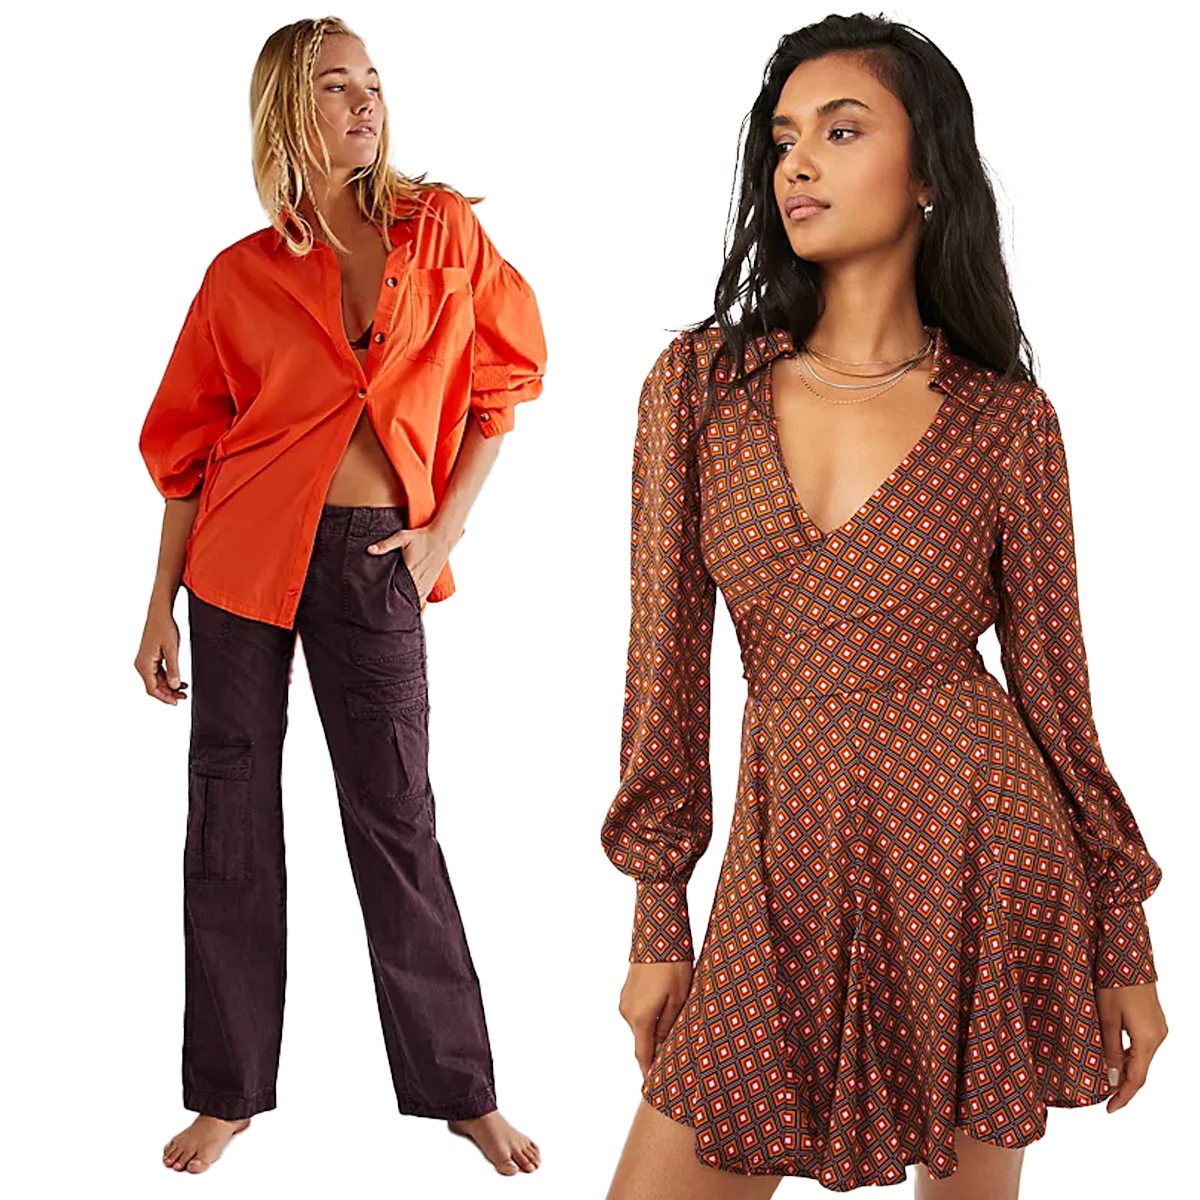 Free People Sale: Score a $400 Jacket for $99 & More Finds Under